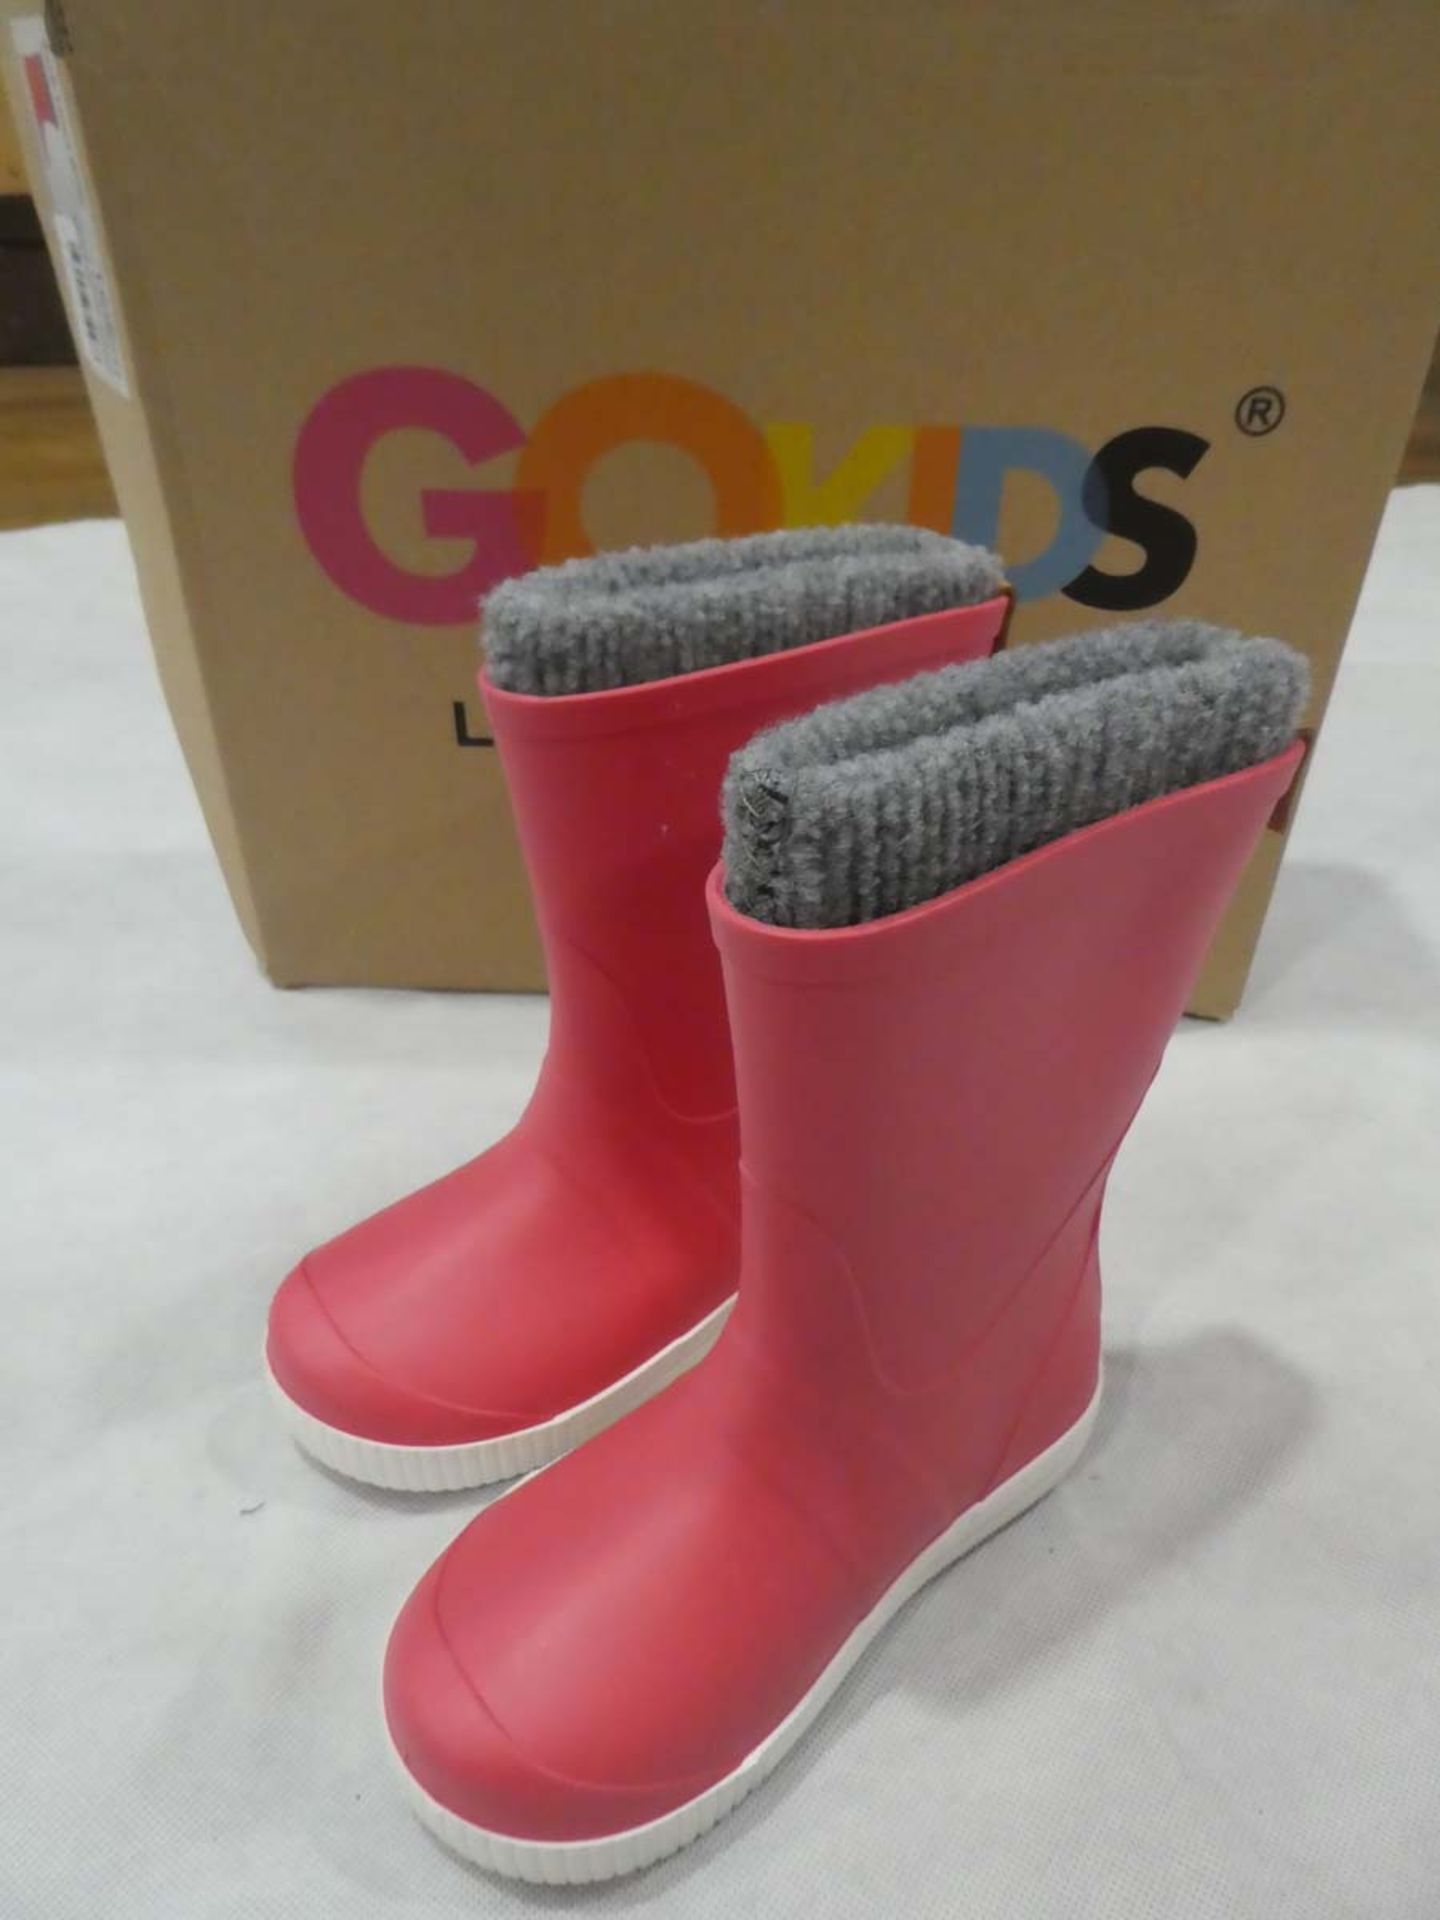 2 GoKids sock lined welly boots in pink size 9